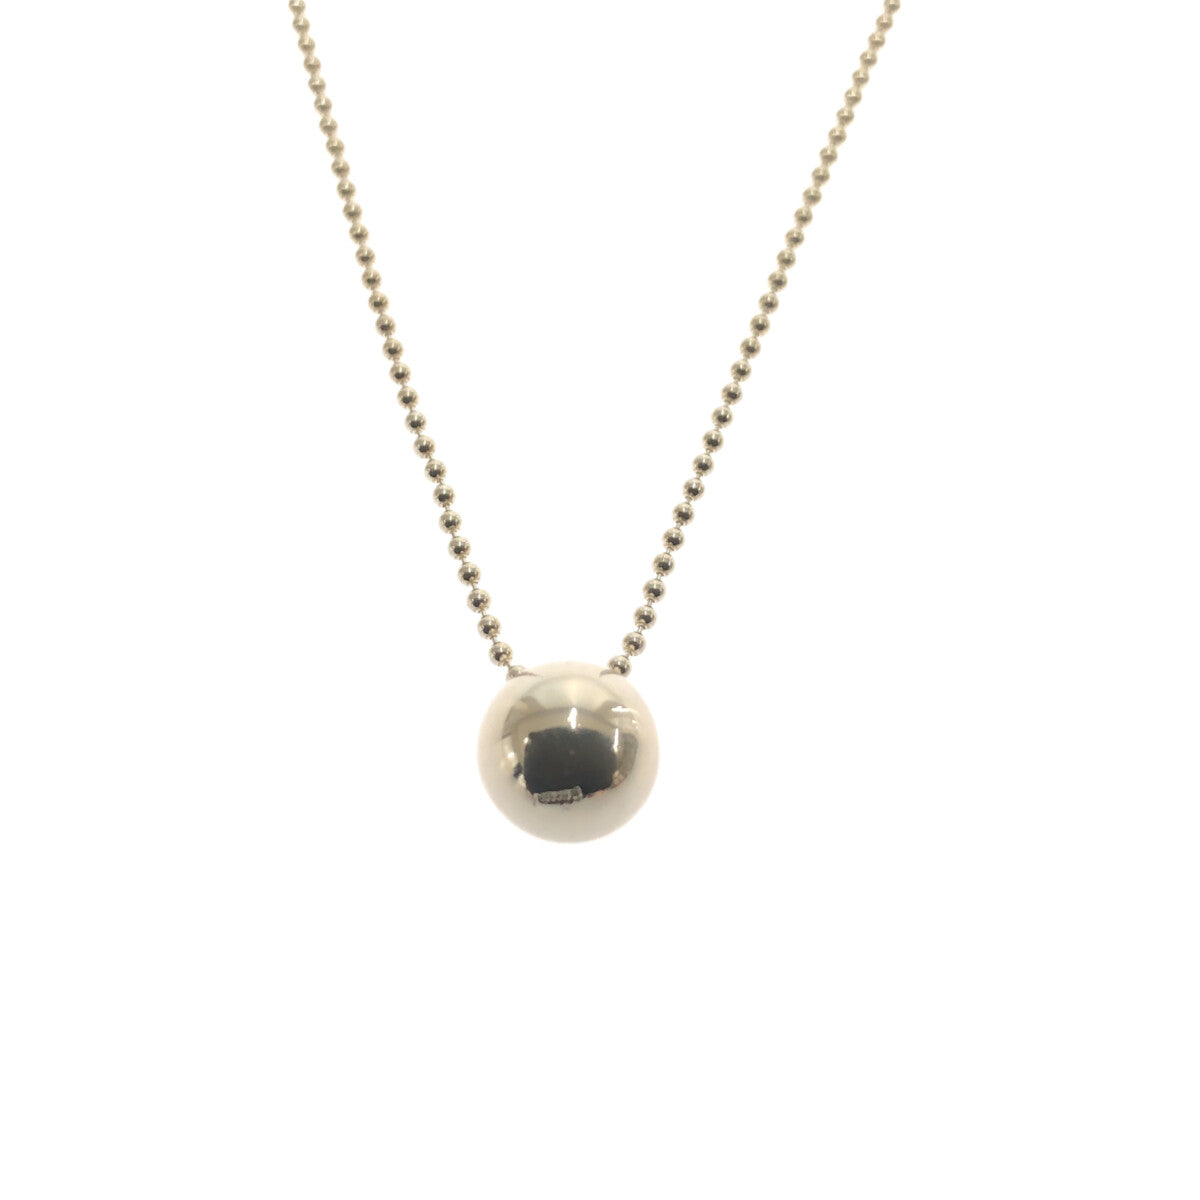 R.ALAGAN / ララガン | BALL NECKLACE Sterling Silver / チェーン ボールネックレス | Free |